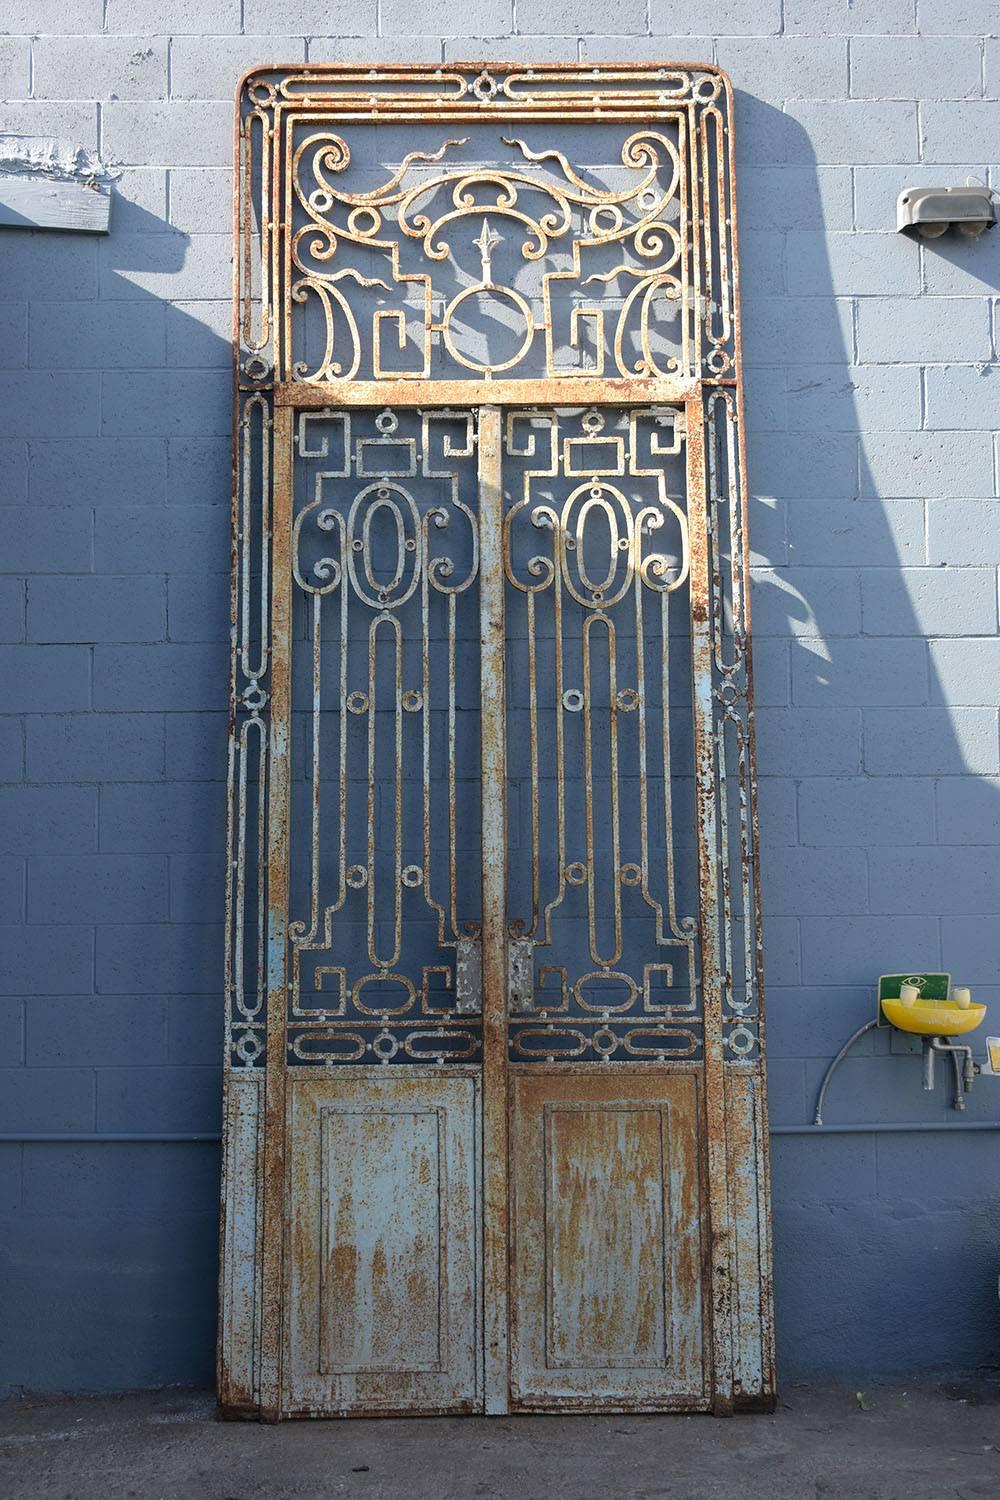 This stunning Regency-style wrought iron gate dates to around the 1850s. The tall gate has two smaller, usable doors and a decorative transom above. Decorating the doors are scroll and geometric designs. Accenting the design of the gate is the